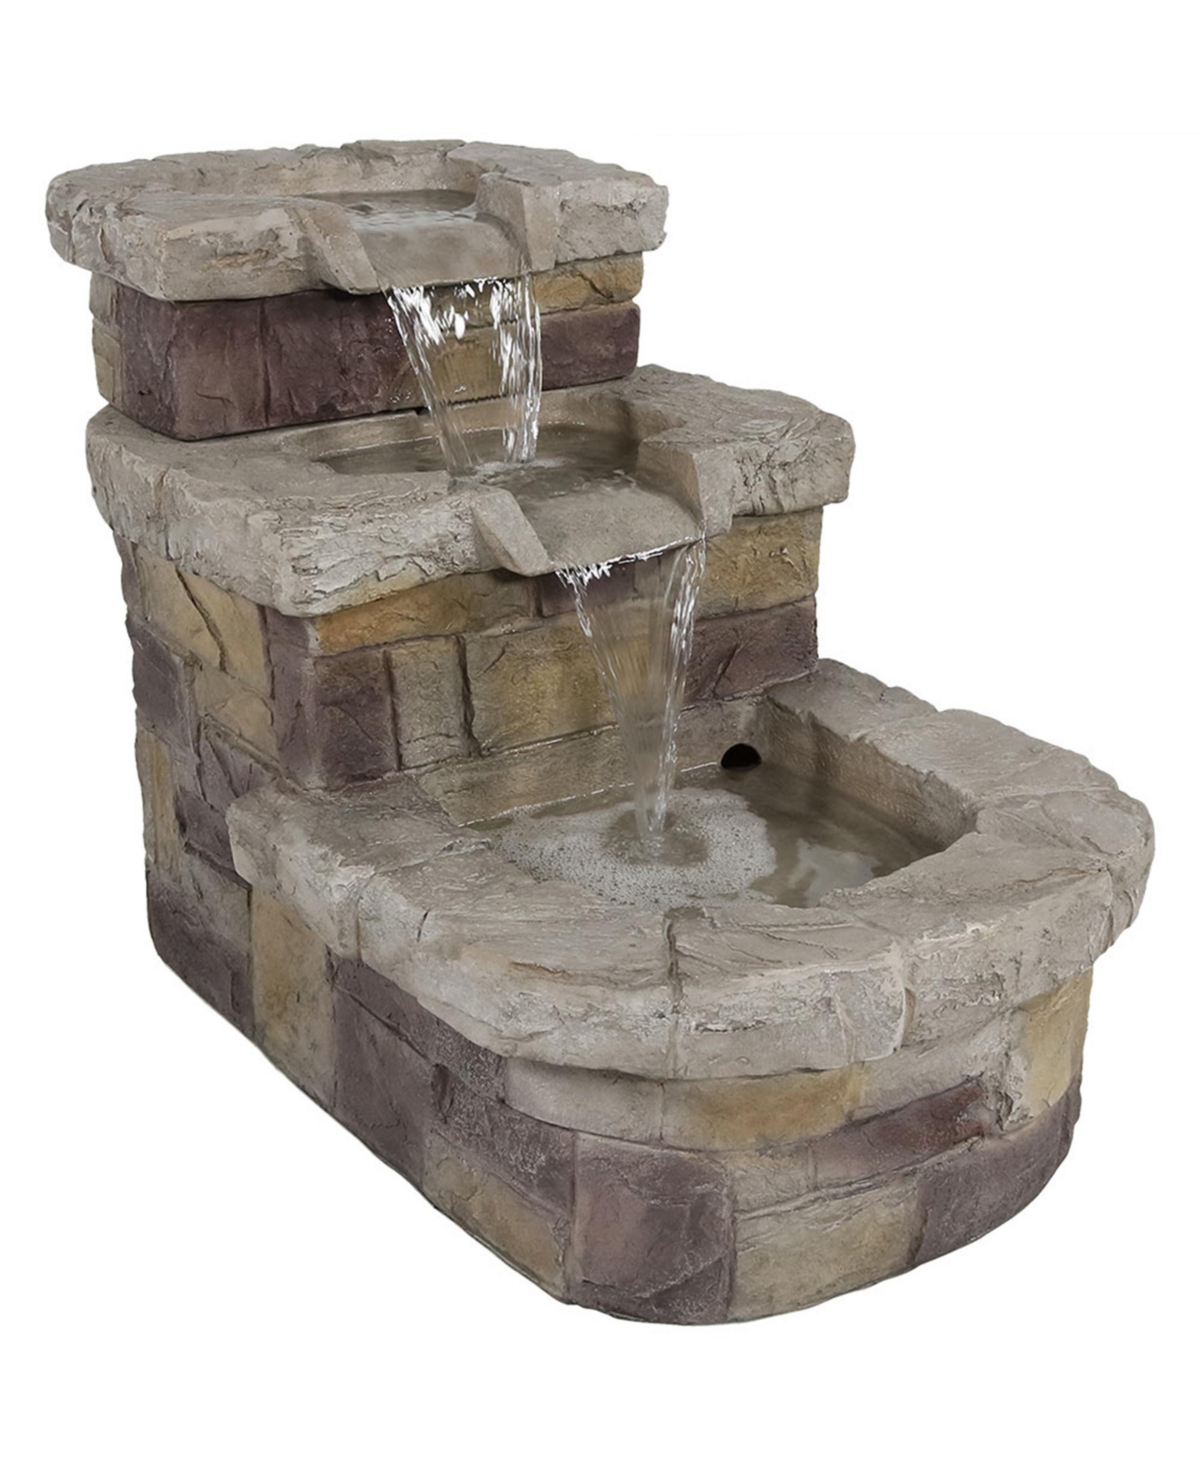 Polyresin 3-Tiered Brick Steps Outdoor Water Fountain - 21 in - Light Grey